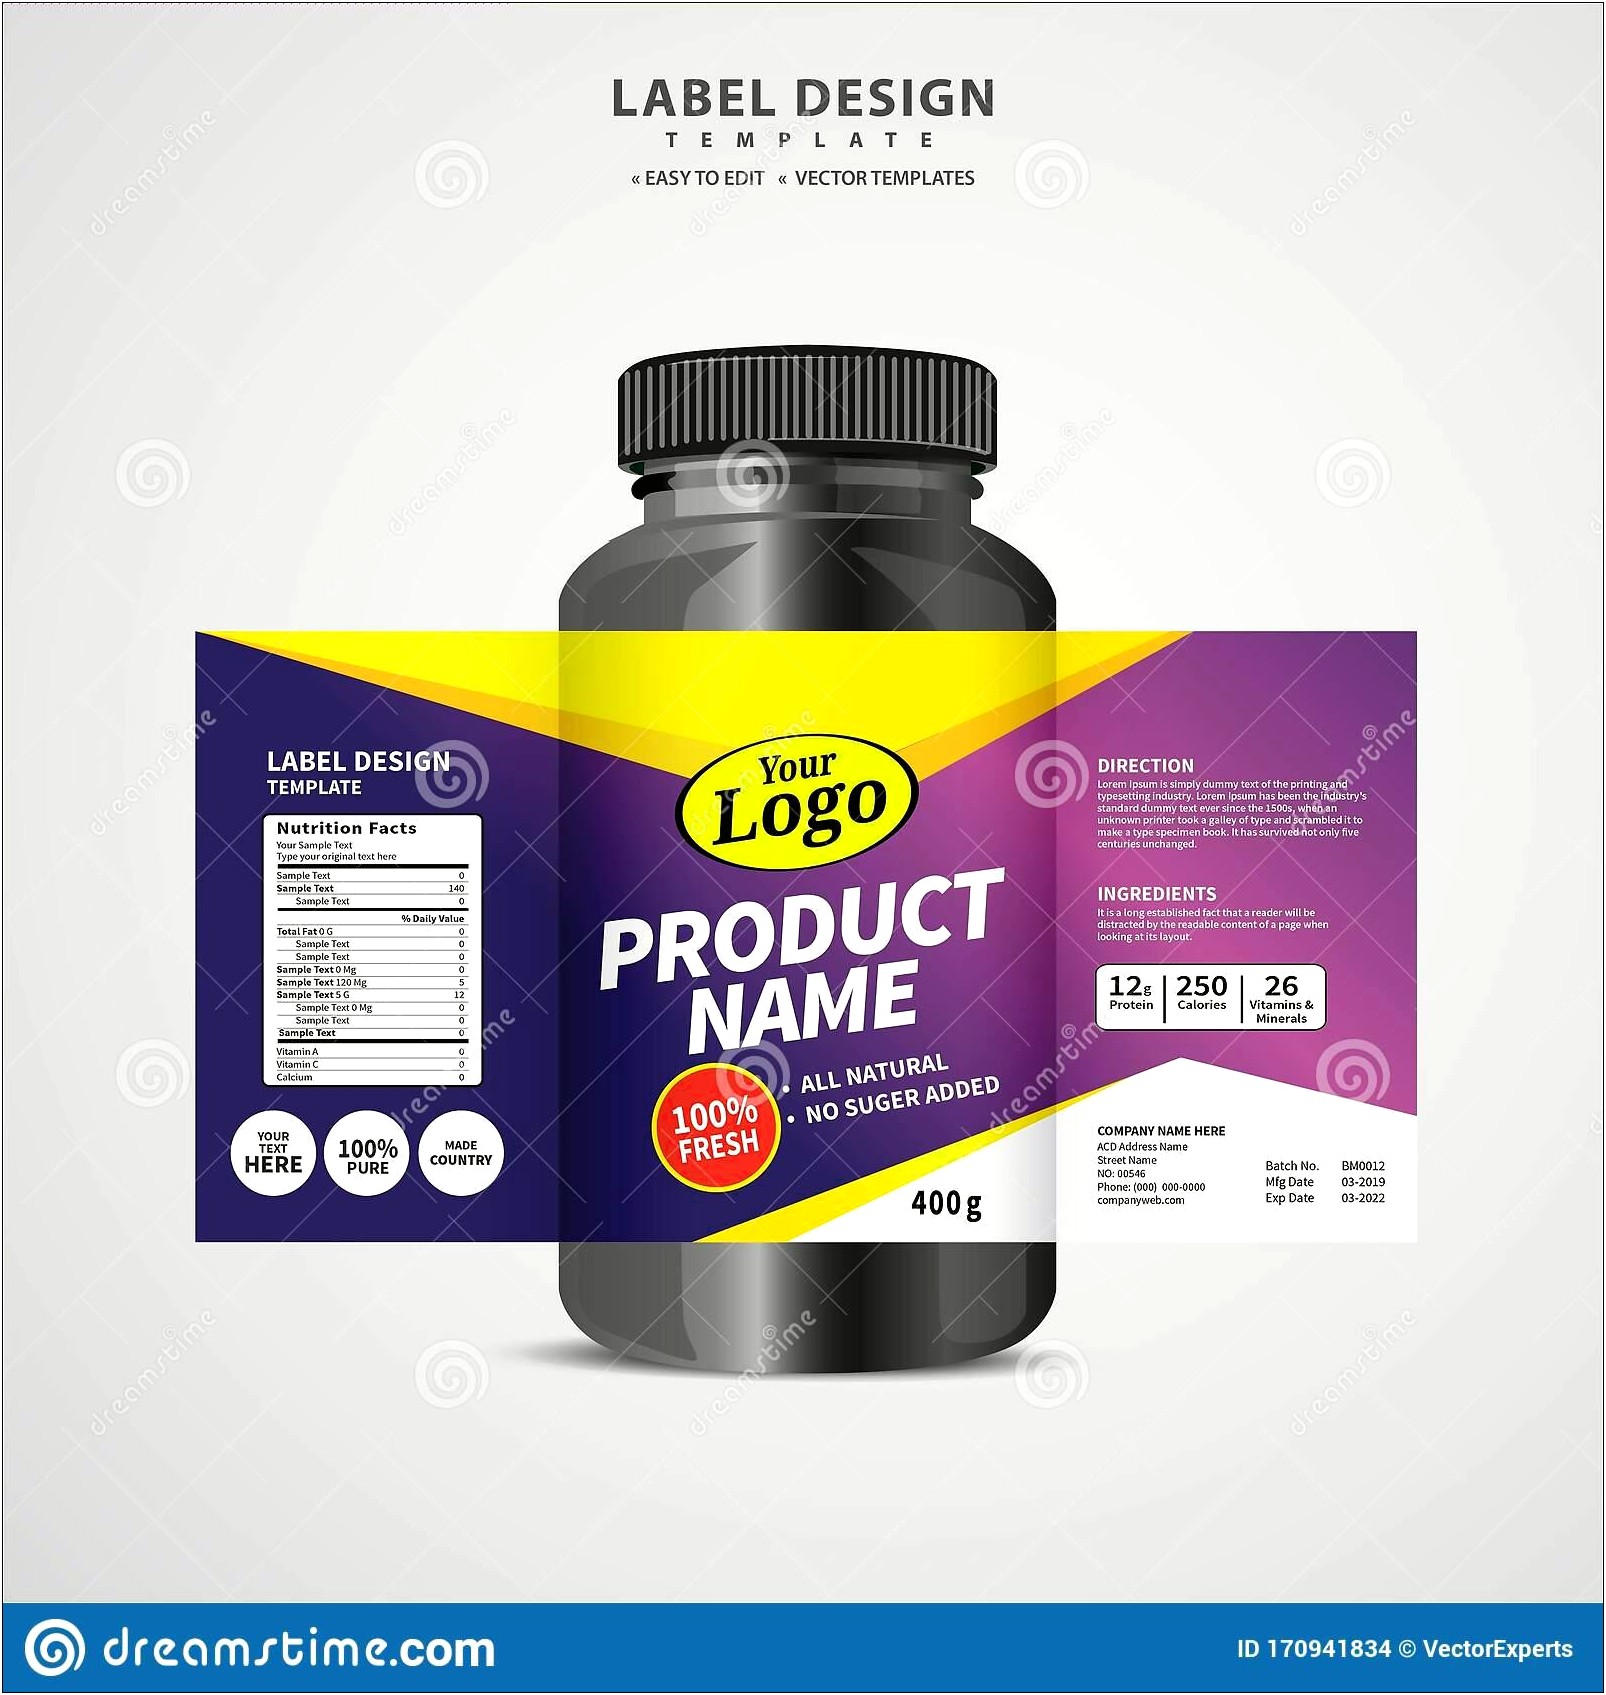 Product Label Design Templates Free Download